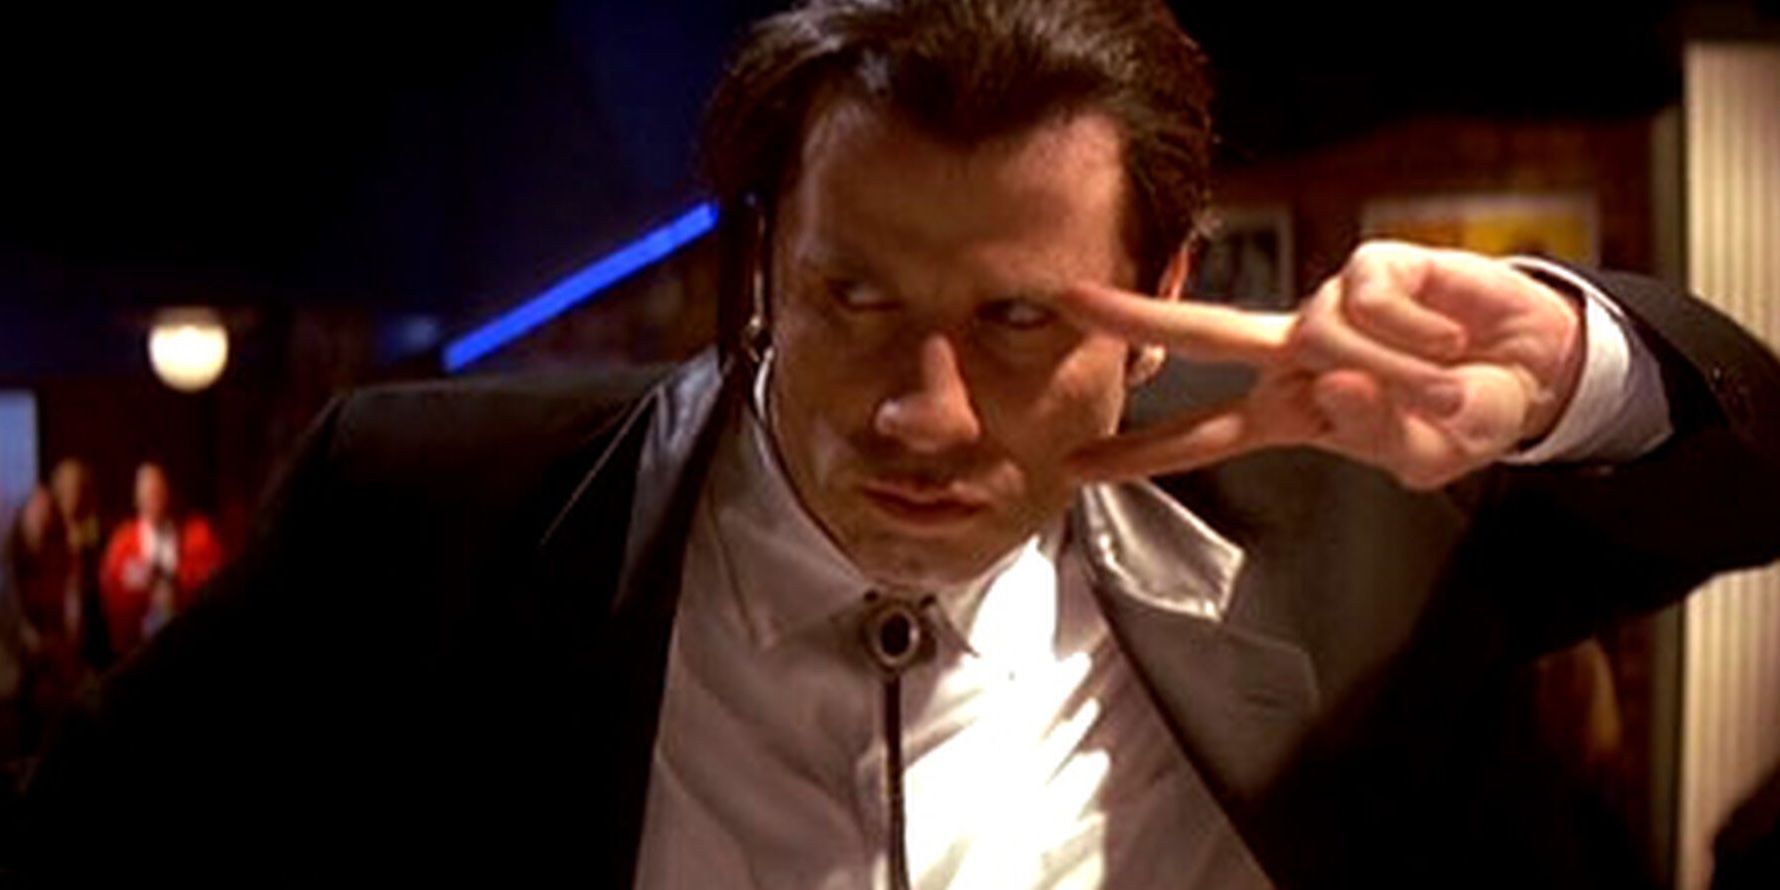 Vincent dances with Mia at a night club in Pulp Fiction.